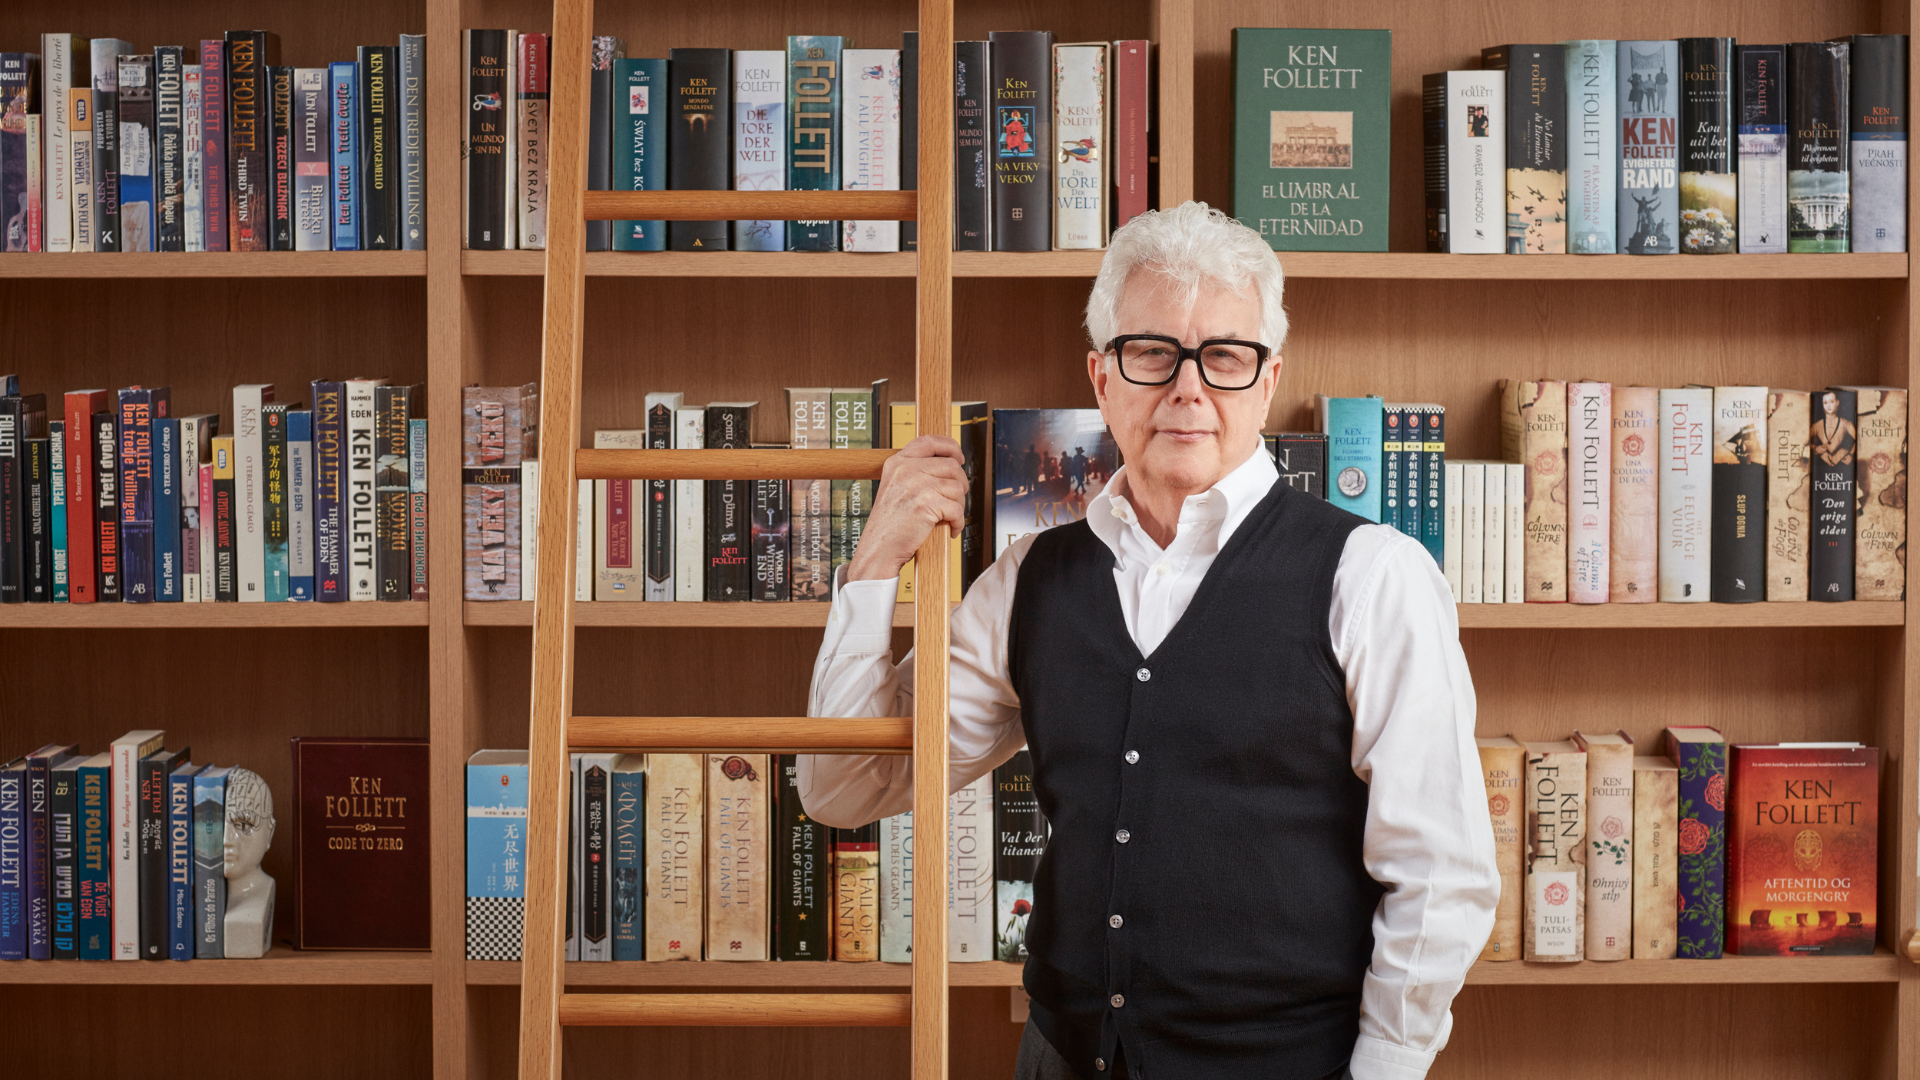 Ken Follett moves to Hachette in global English language deal